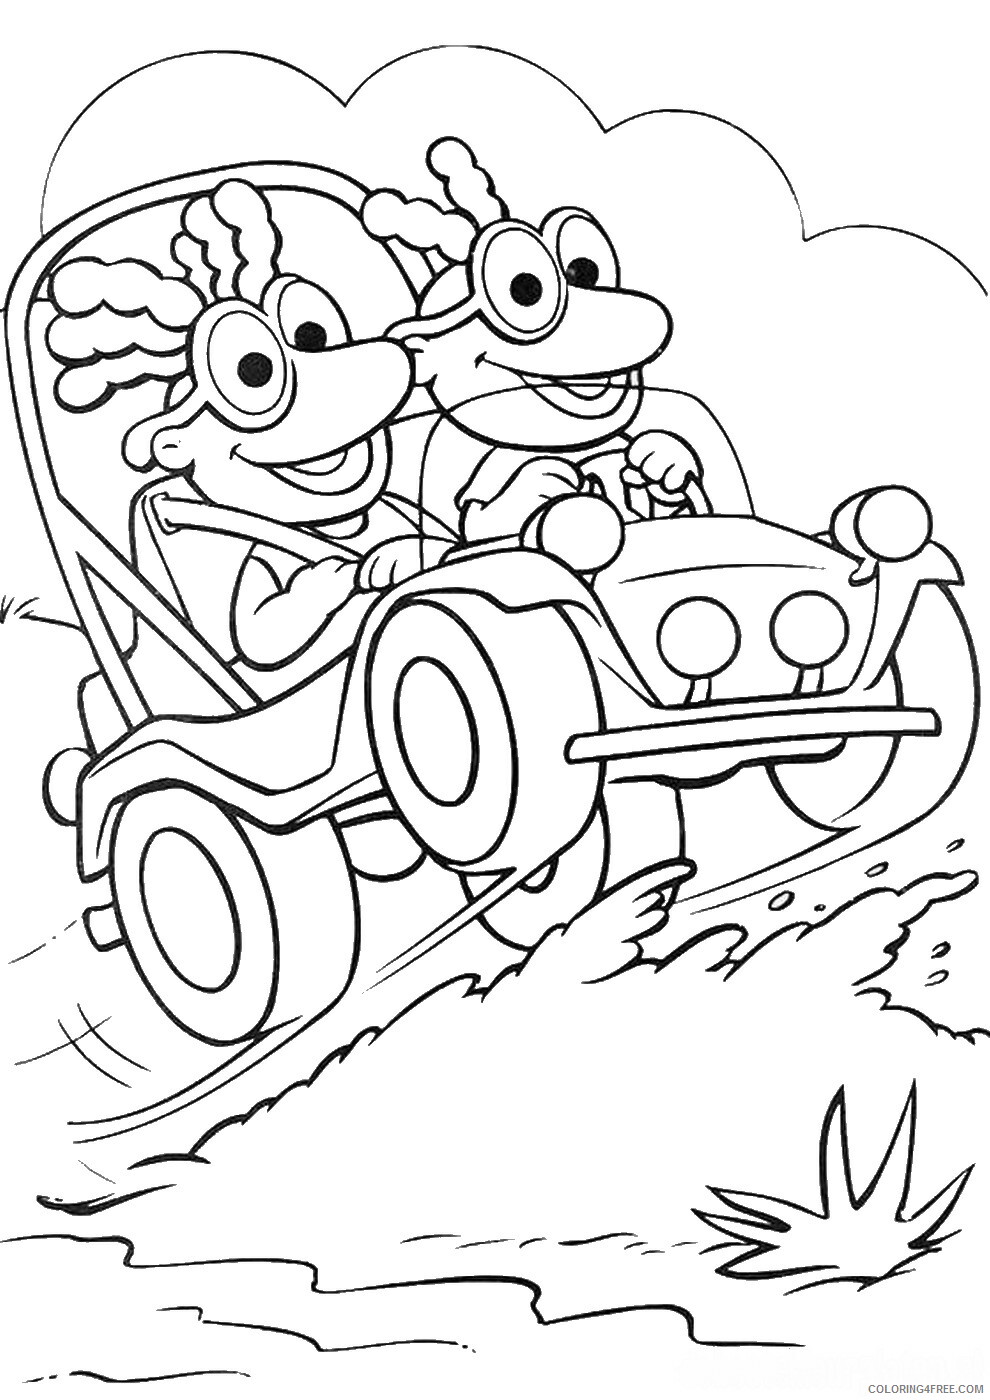 The Muppet Show Coloring Pages TV Film muppets_cl_17 Printable 2020 09376 Coloring4free